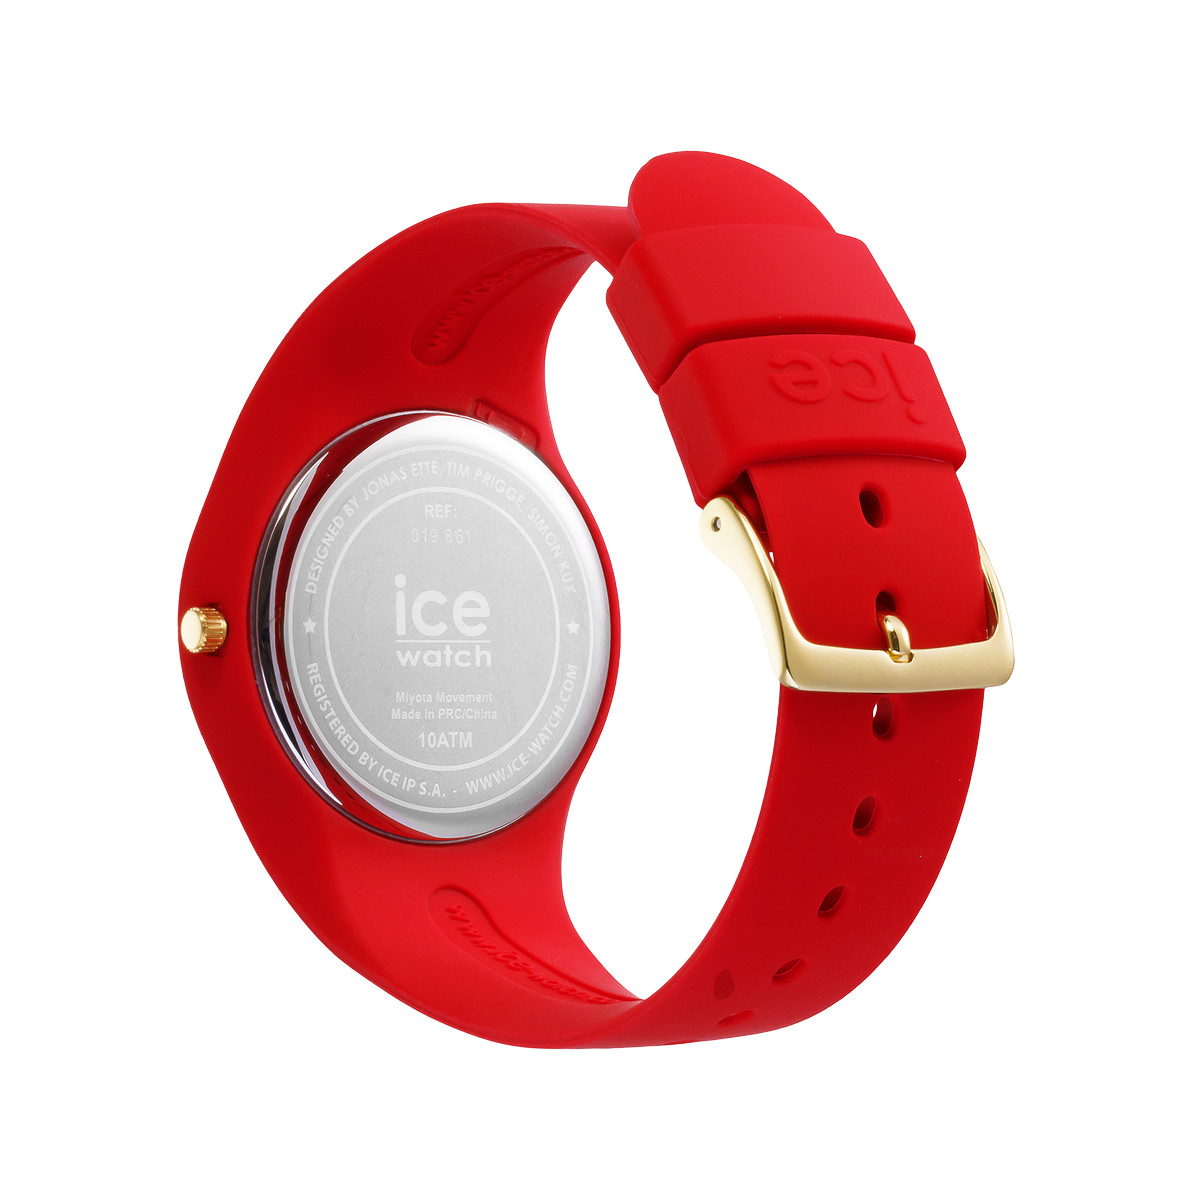 Montre Ice Watch  Femme silicone rouge. - vue 3